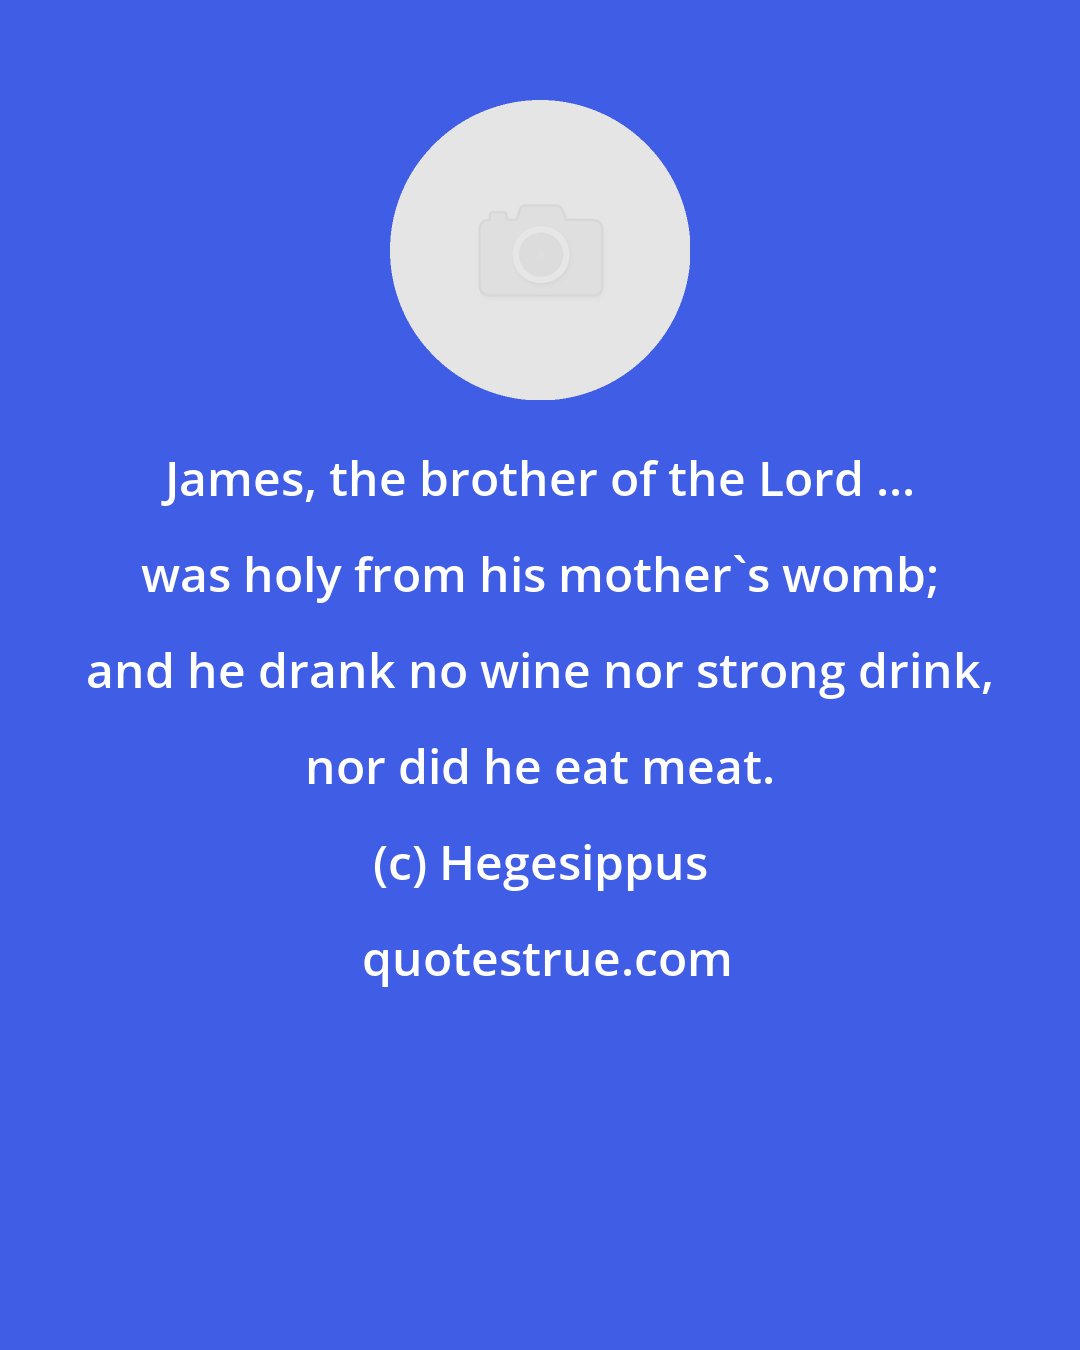 Hegesippus: James, the brother of the Lord ... was holy from his mother's womb; and he drank no wine nor strong drink, nor did he eat meat.